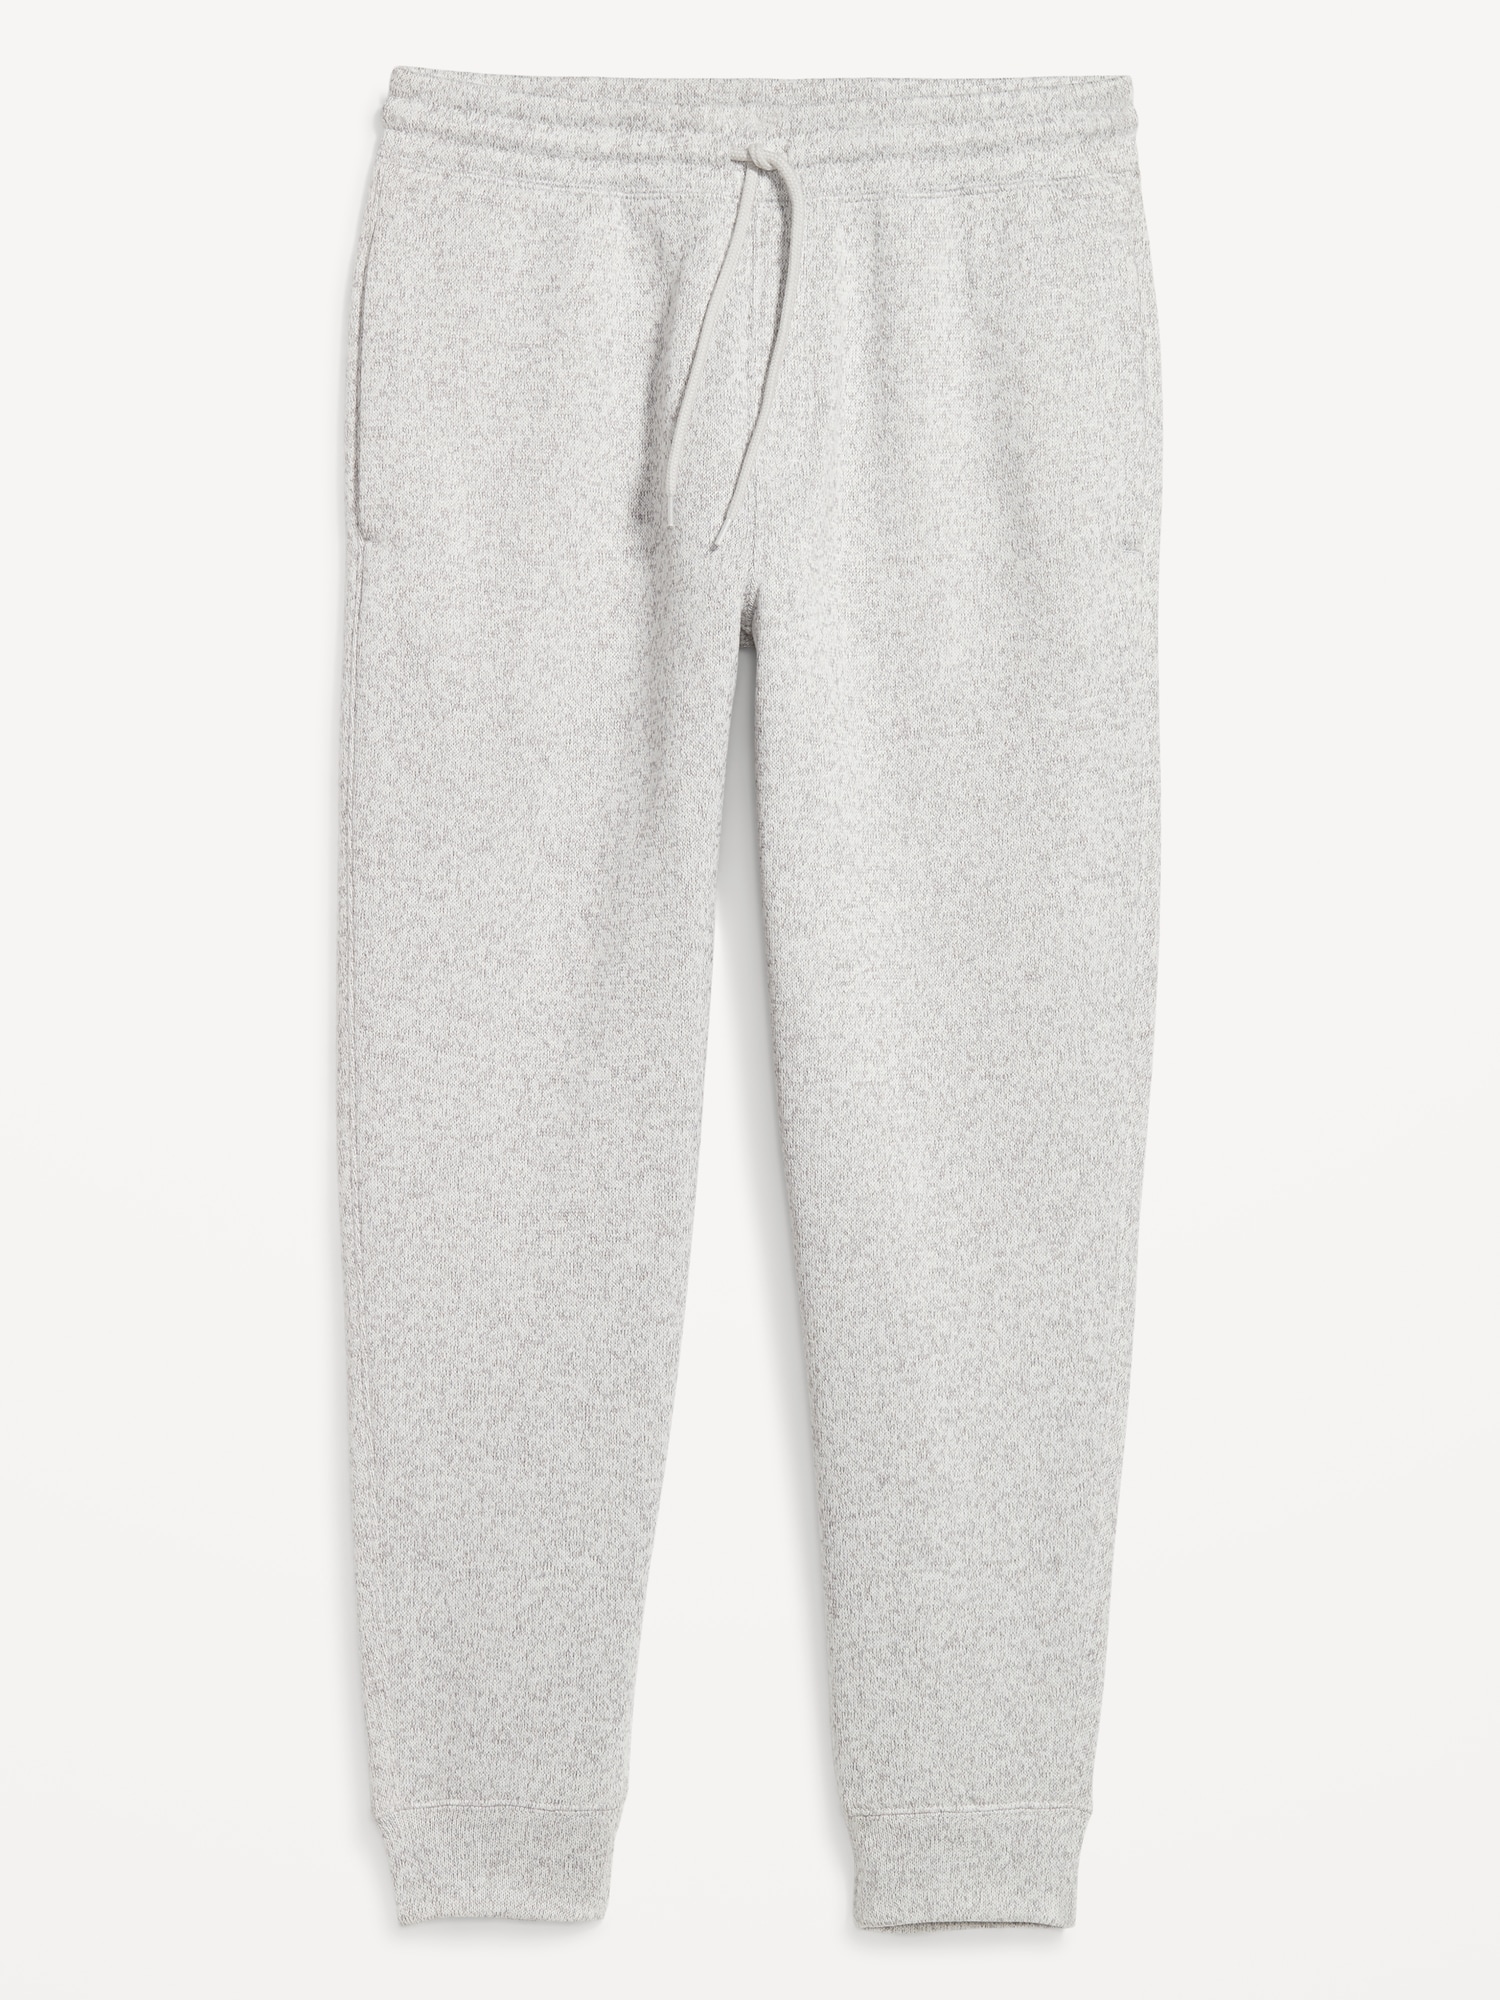 Sweater-Knit Performance Jogger Pants for Men | Old Navy